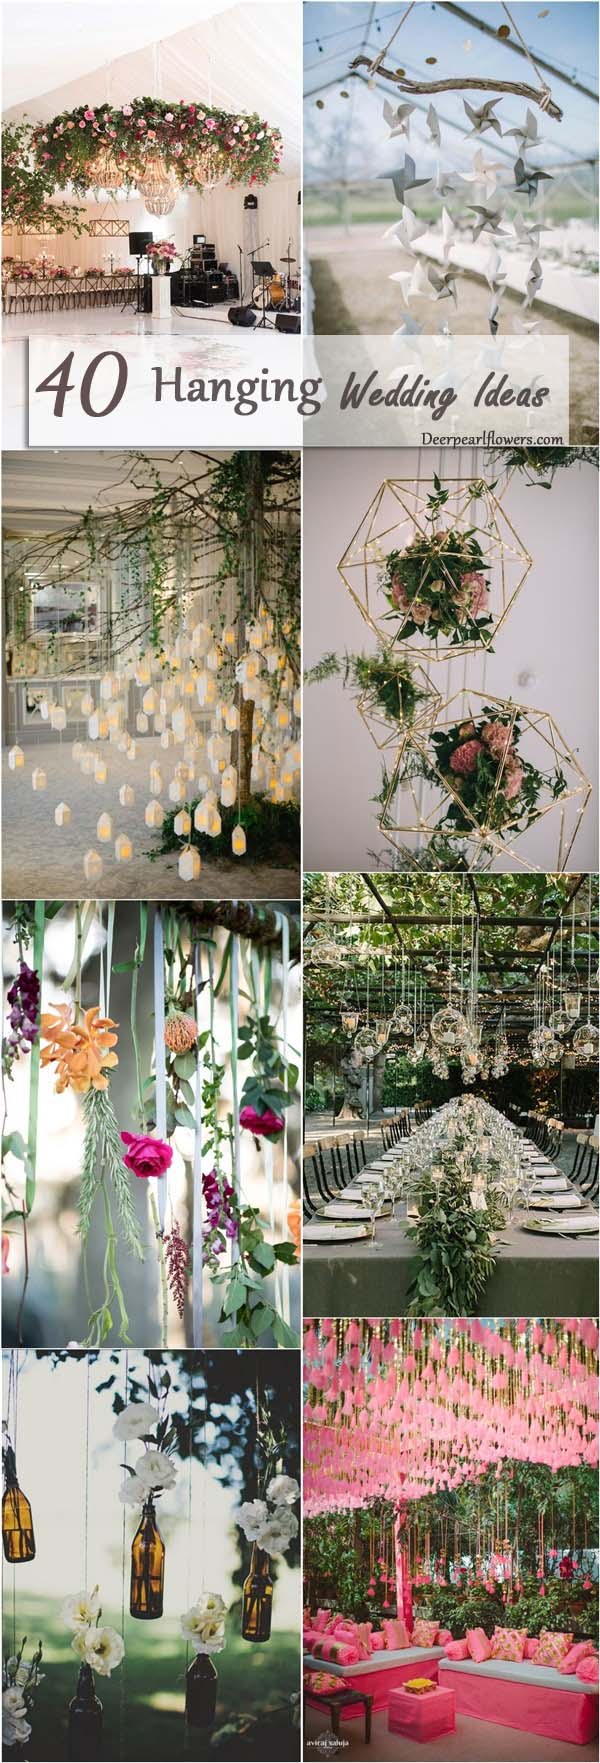 hanging wedding ideas and themes